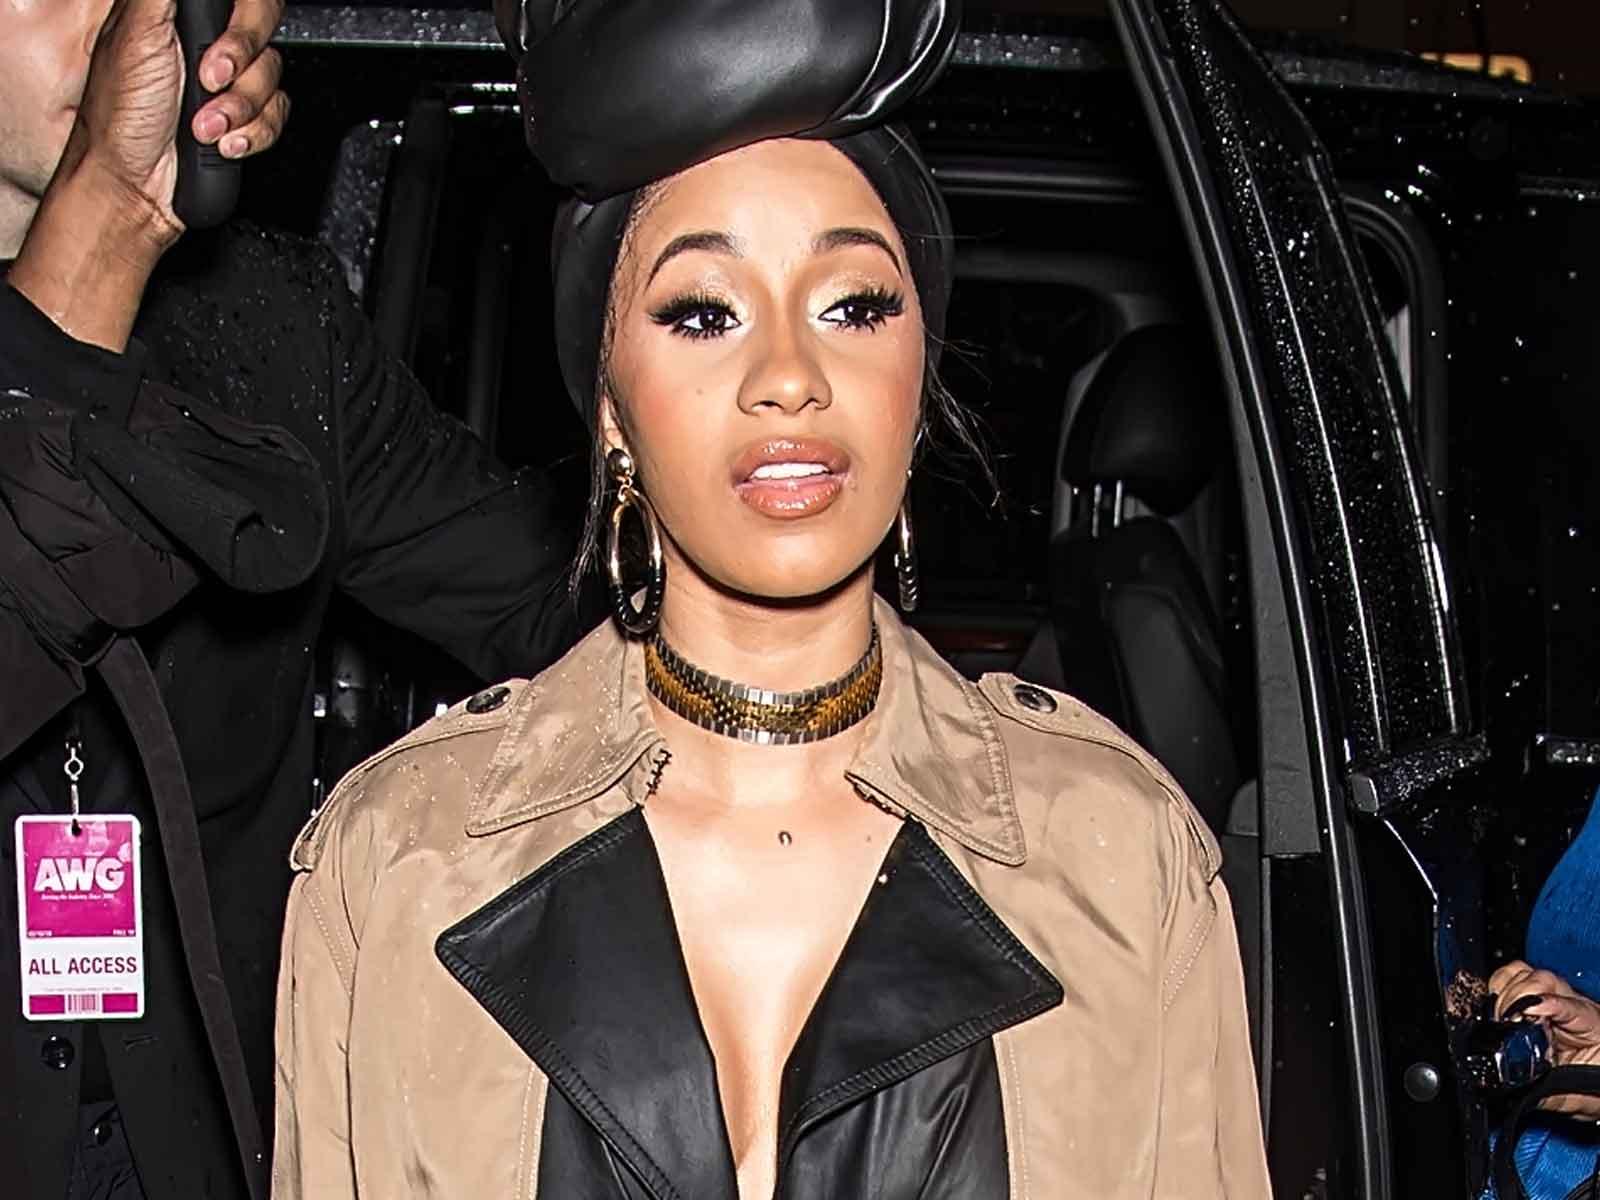 Cardi B Claims Her Ex-Manager Took Advantage of Her Lack of Education, Plans to Countersue